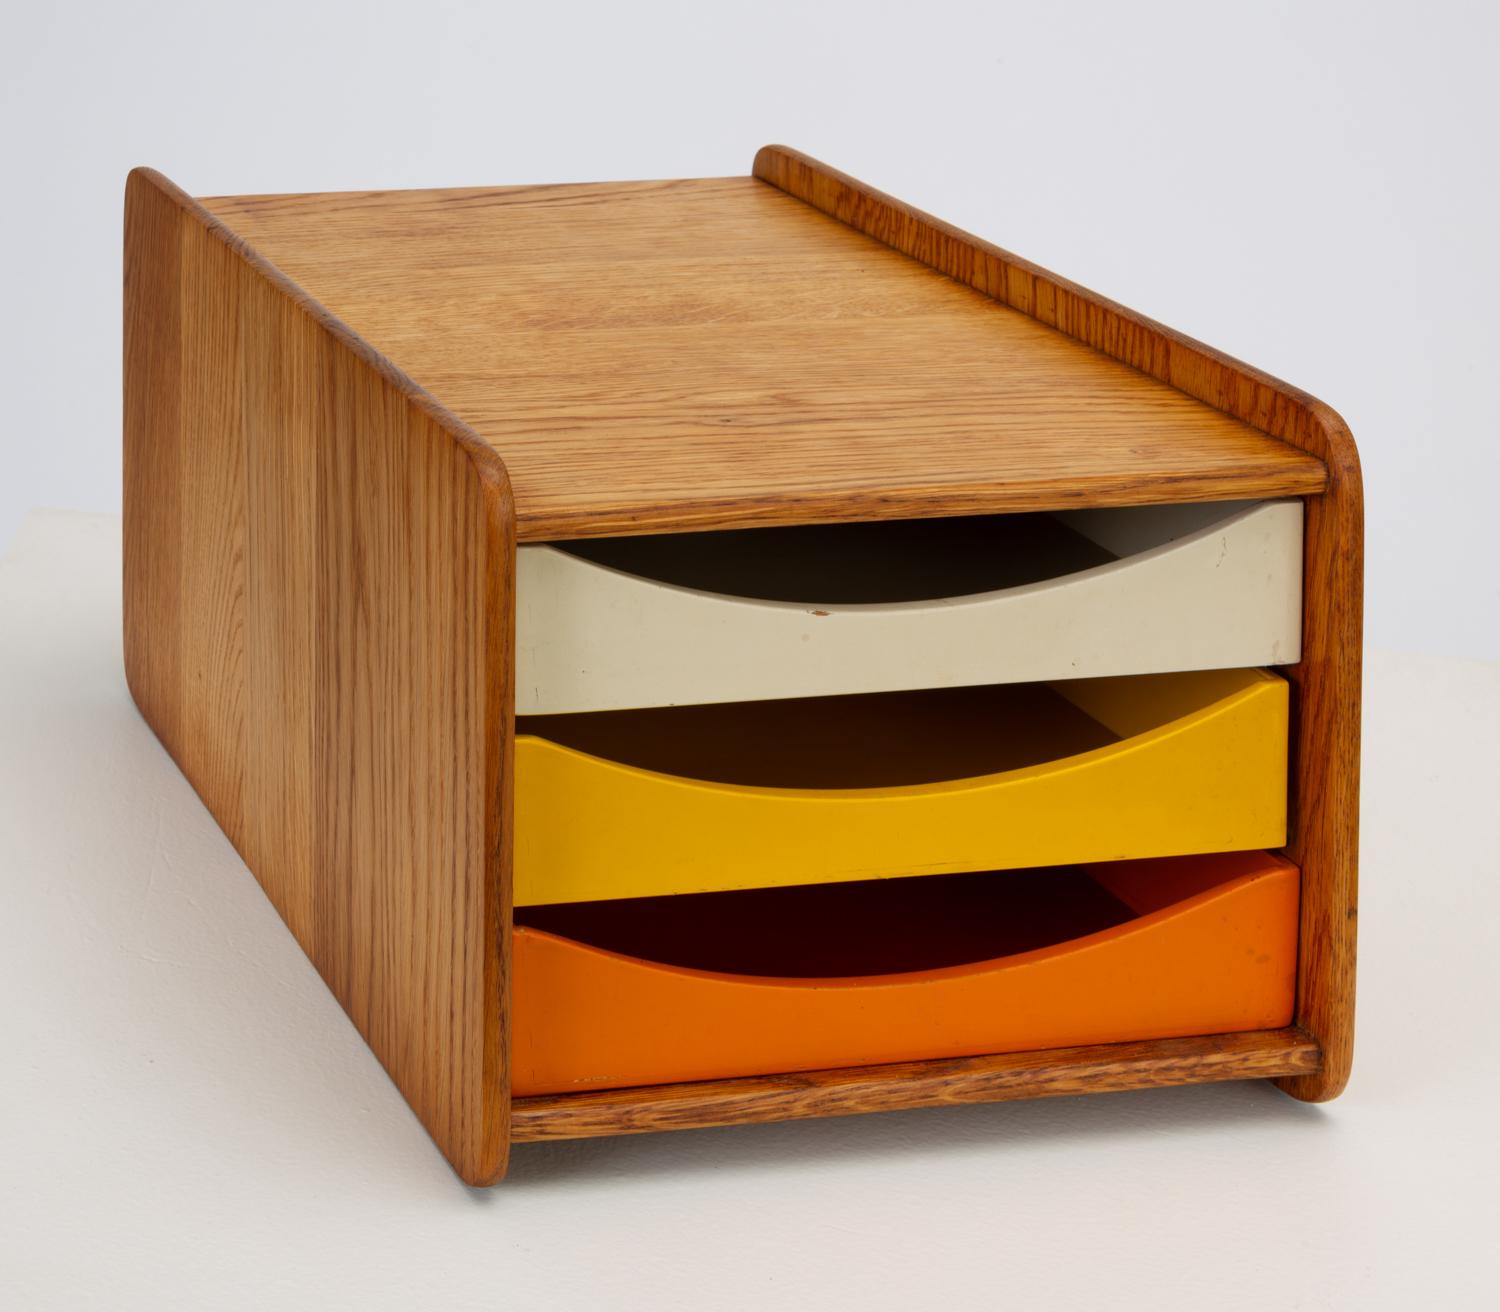 Danish-designed, Swedish-made desk organizer by Børge Mogensen for Karl Andersson & Söner from the late 1950s or early 1960s. The small box has a case of solid oak with rounded corners and raised edges. Three painted drawers in white, yellow, and